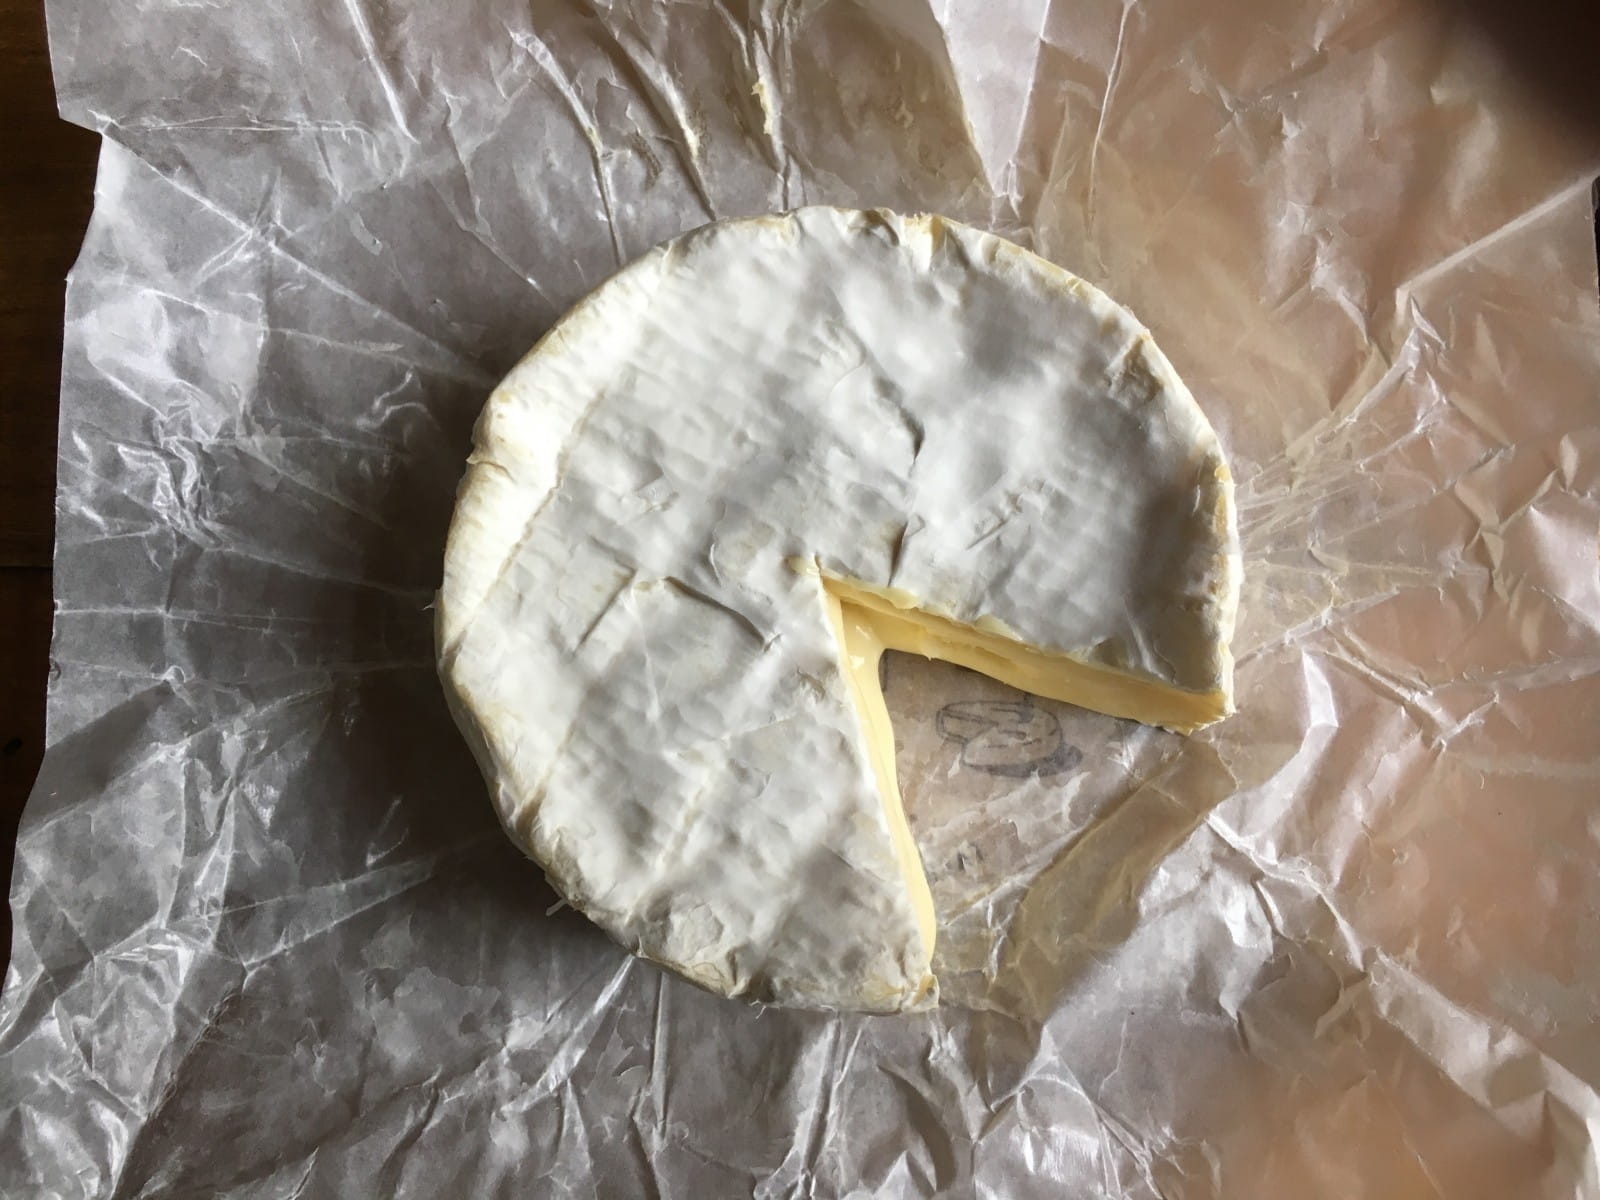 What to pair with Camembert: 5 great drink matches